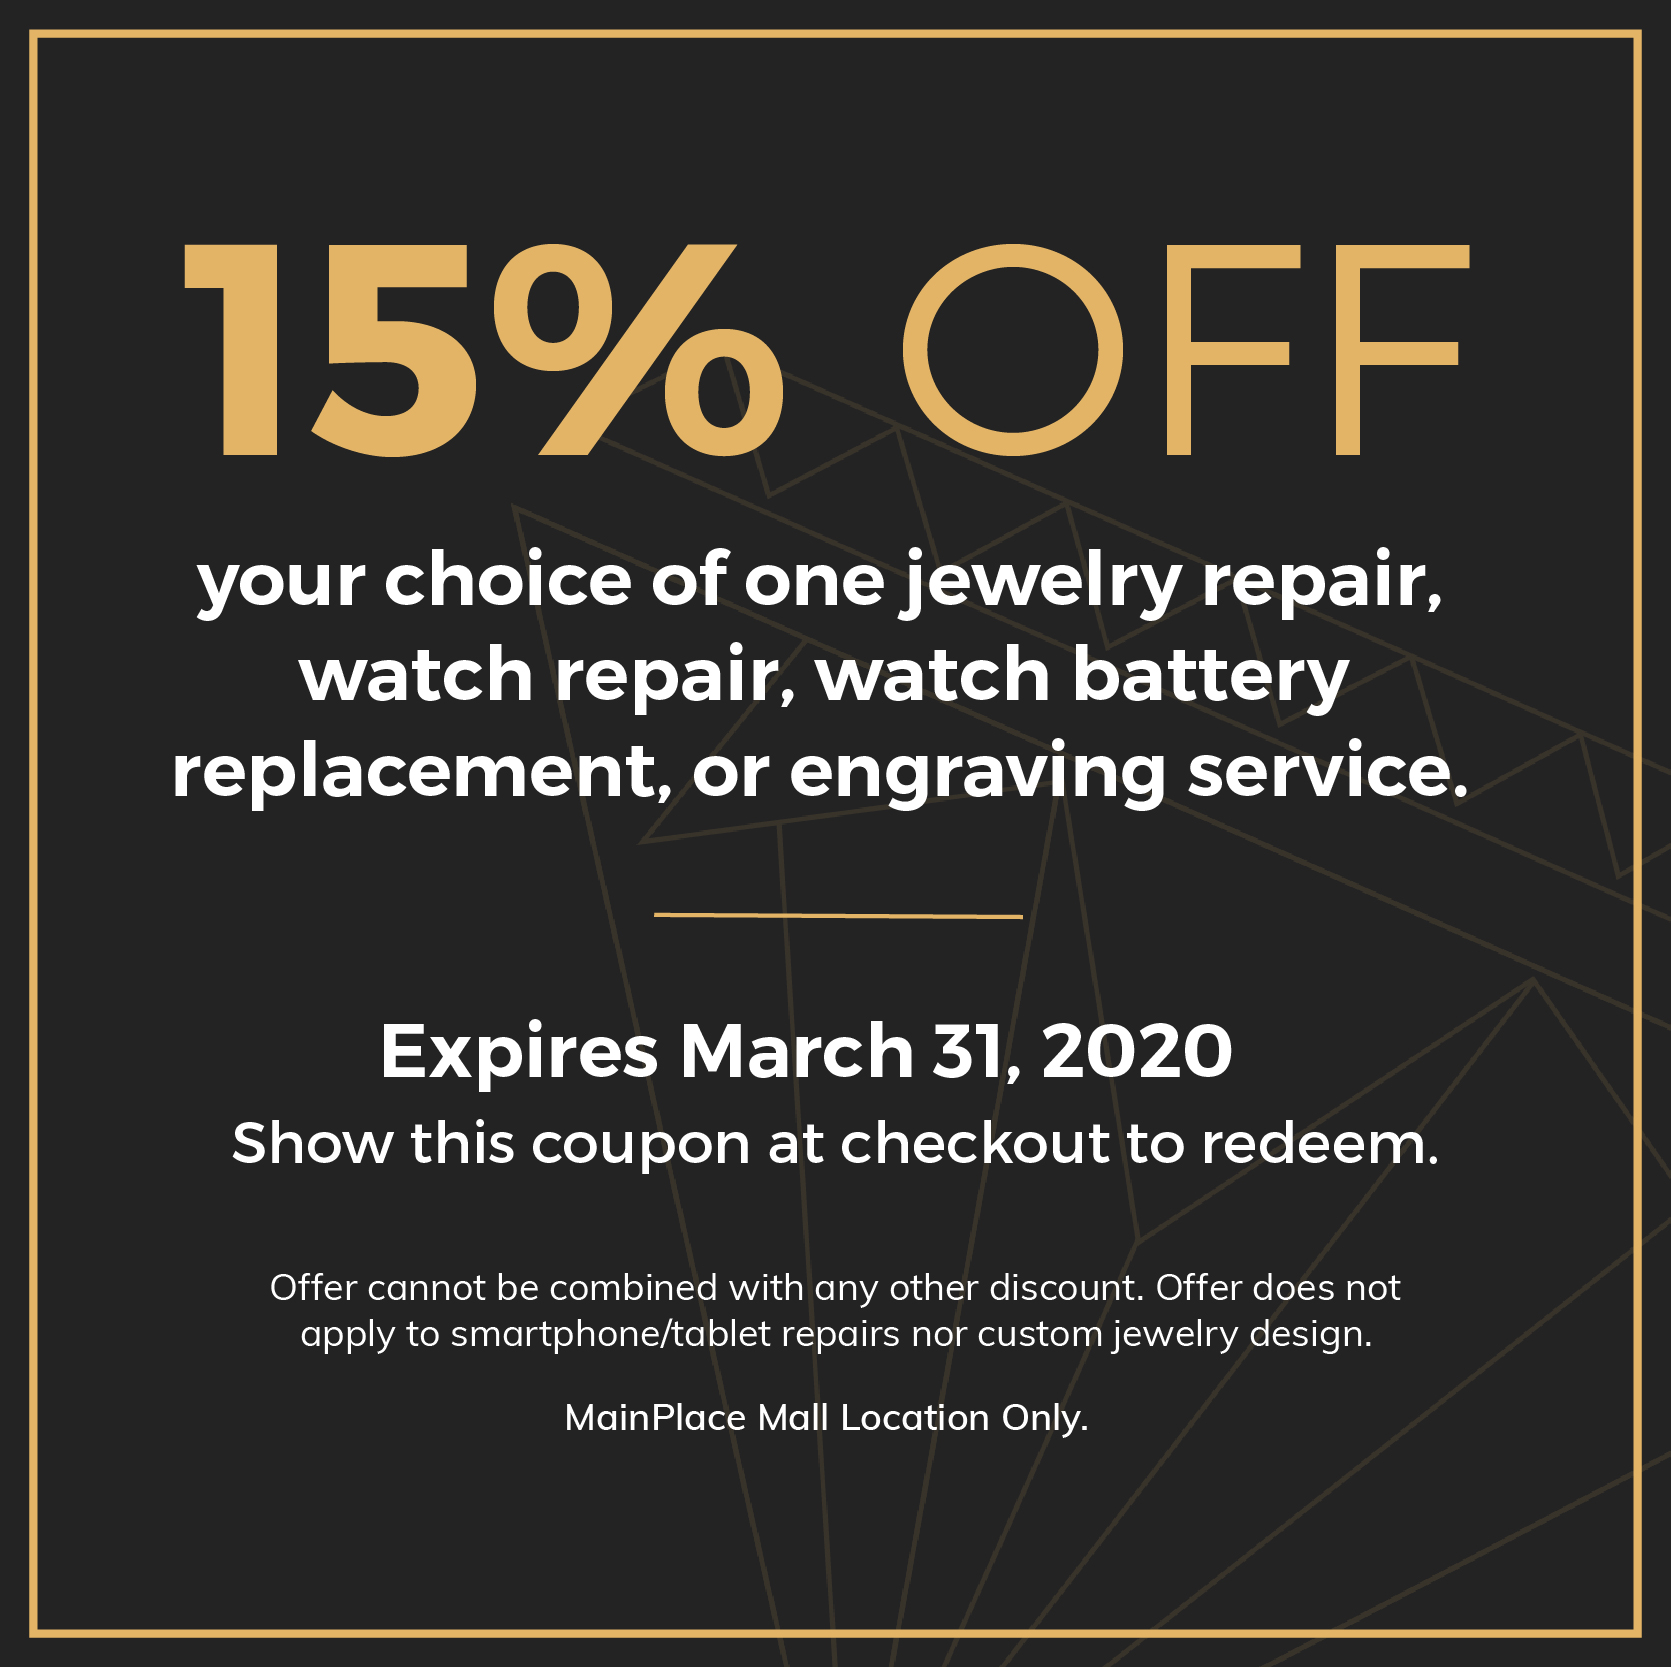 15% OFF. your choice of one jewelry repair, watch repair, watch battery replacement, or engraving service. Expires March 31, 2020. Show this coupon at checkout to redeem. Offer cannot be combined with any other discount. Offer does not apply to smartphone/tablet repairs nor custom jewelry design. MainPlace Mall Location Only.